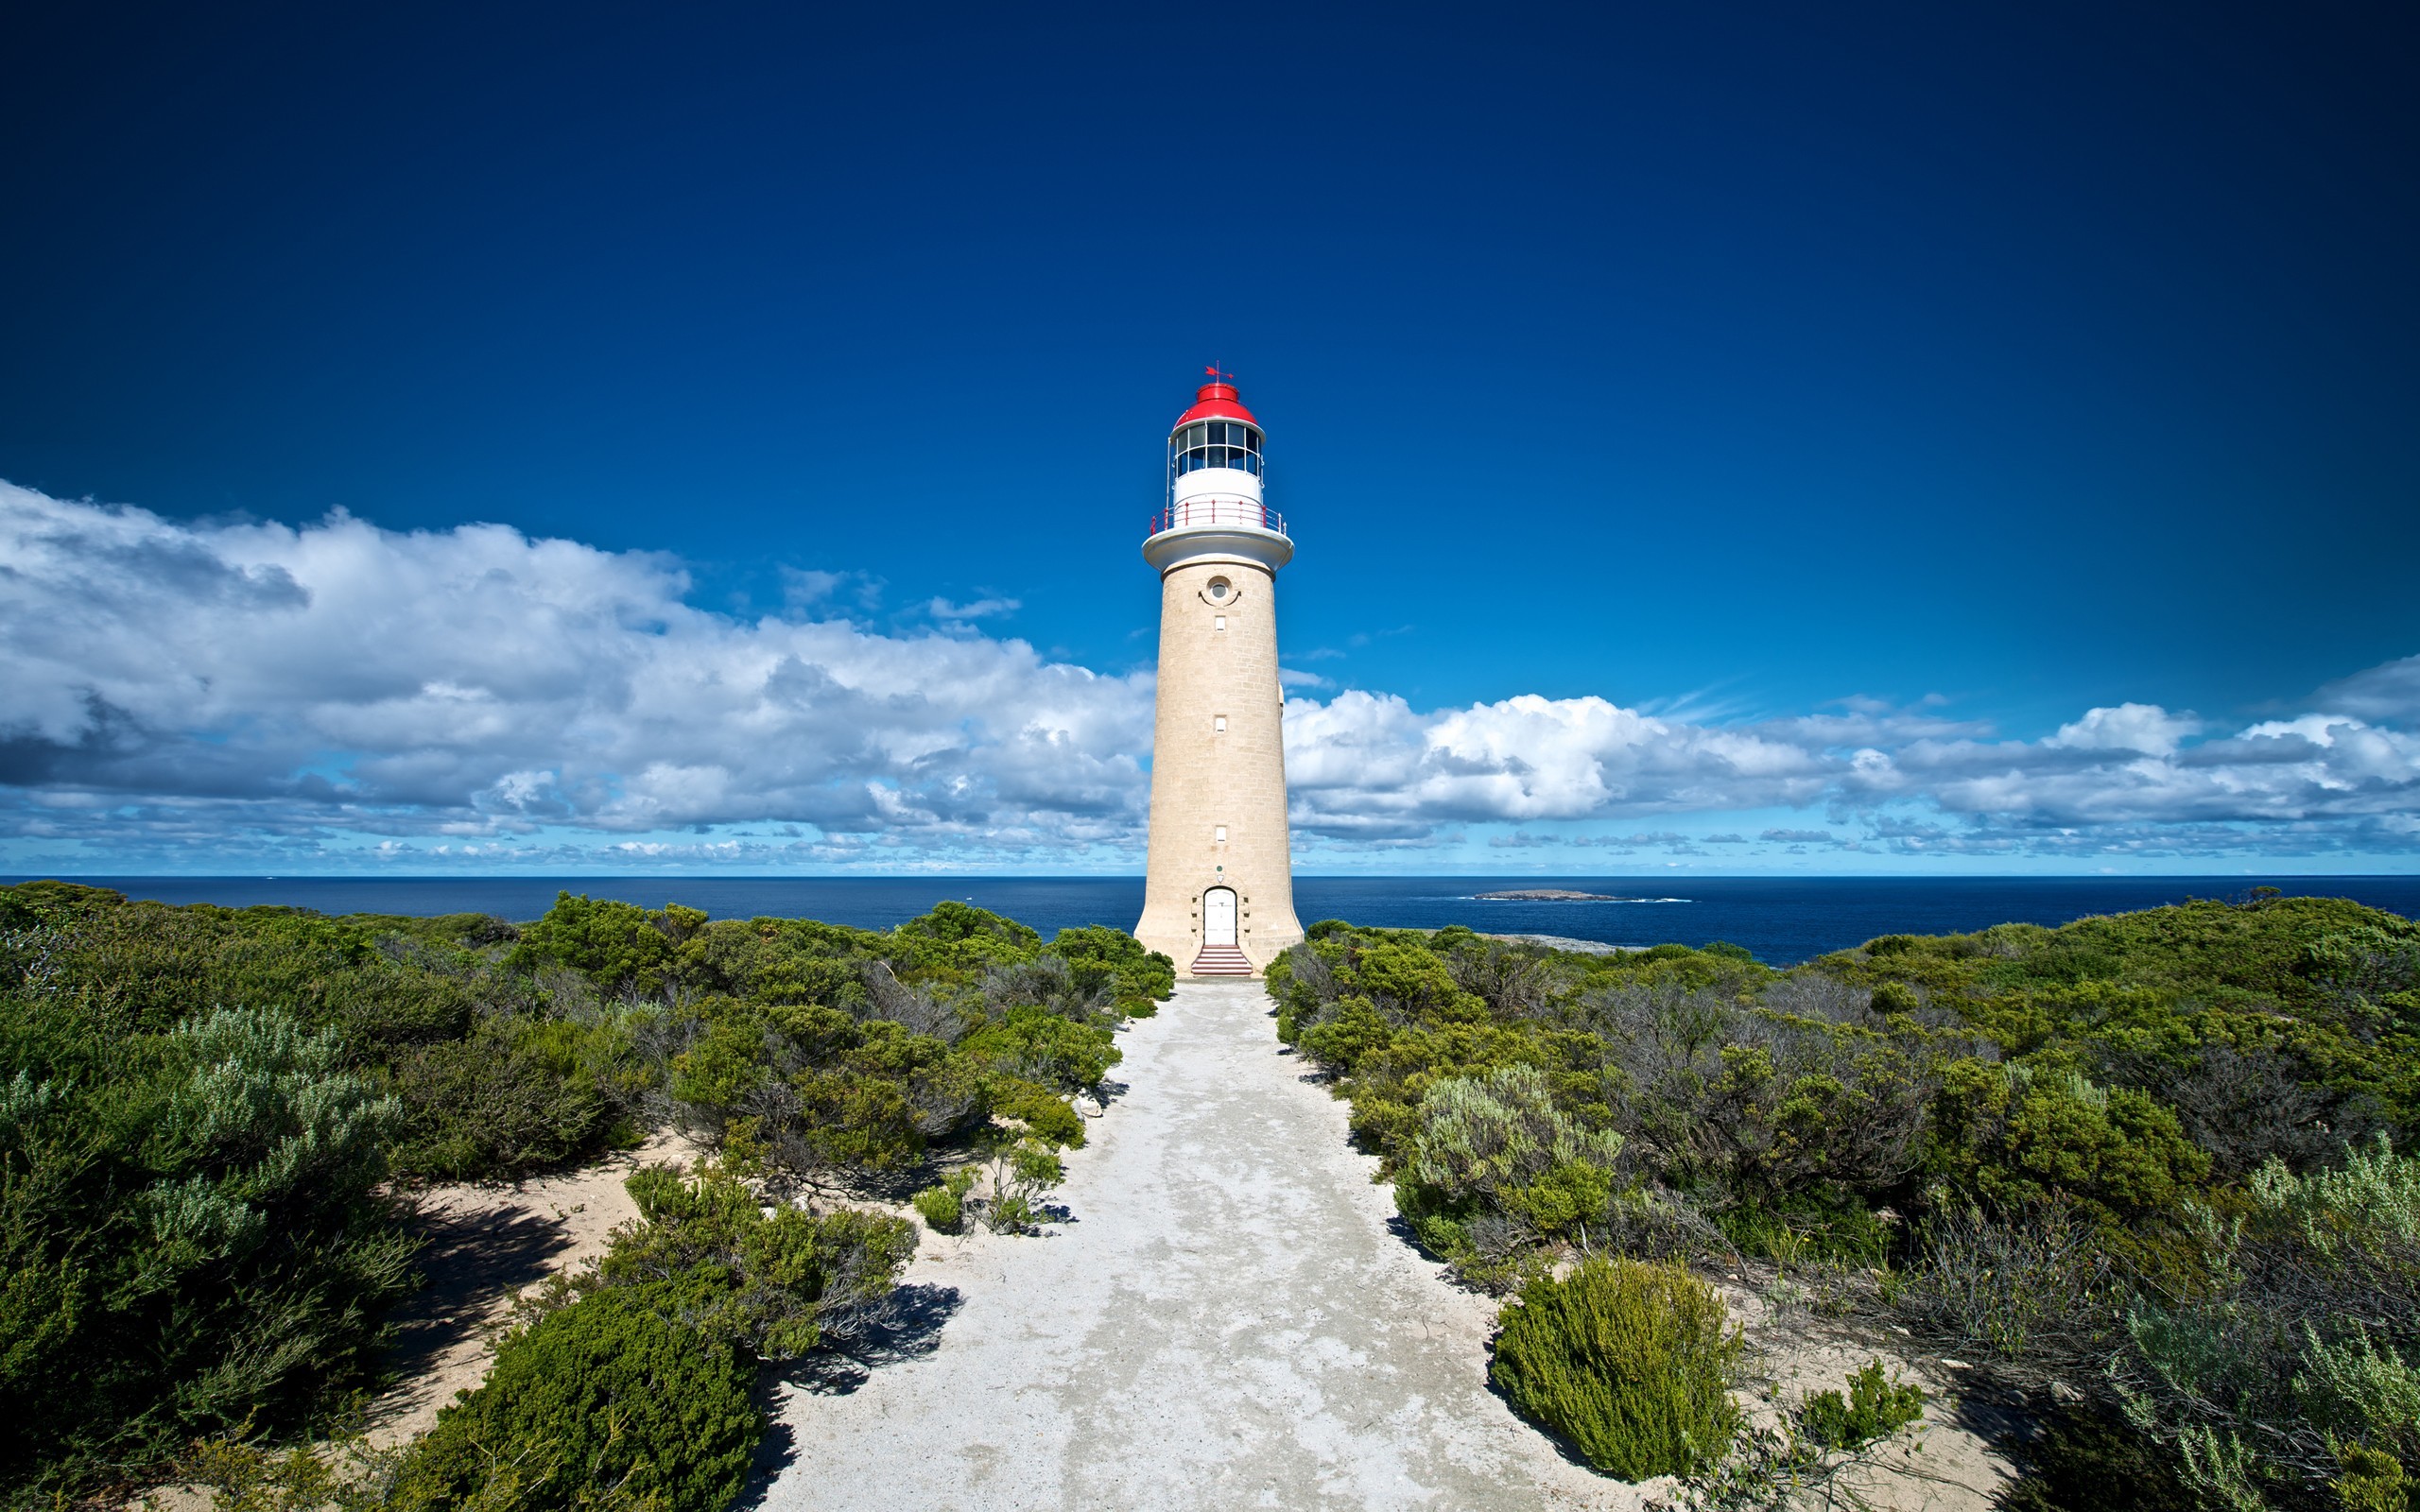 General 2560x1600 outdoors plants clouds lighthouse Australia